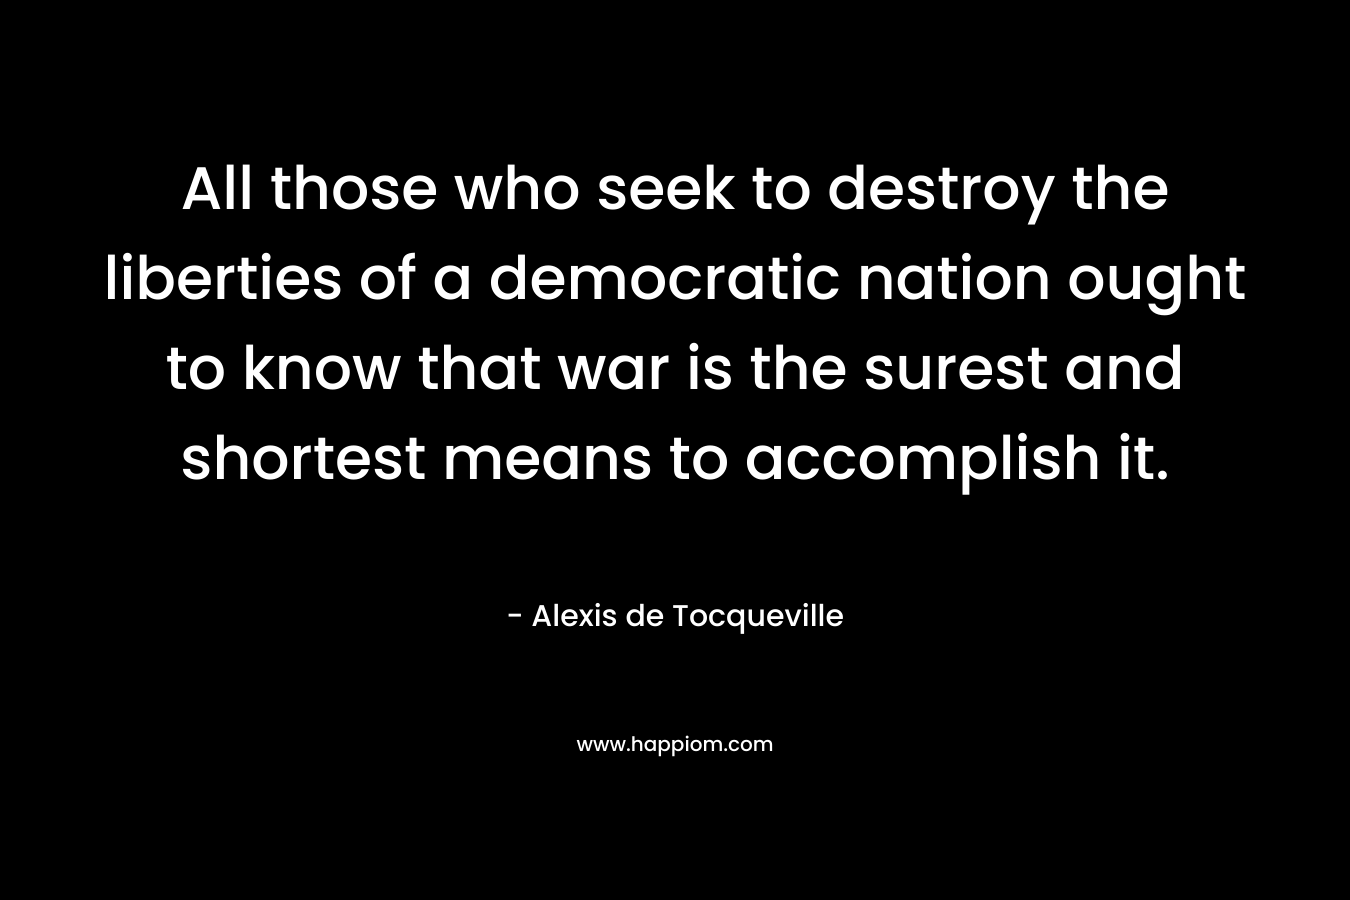 All those who seek to destroy the liberties of a democratic nation ought to know that war is the surest and shortest means to accomplish it. – Alexis de Tocqueville